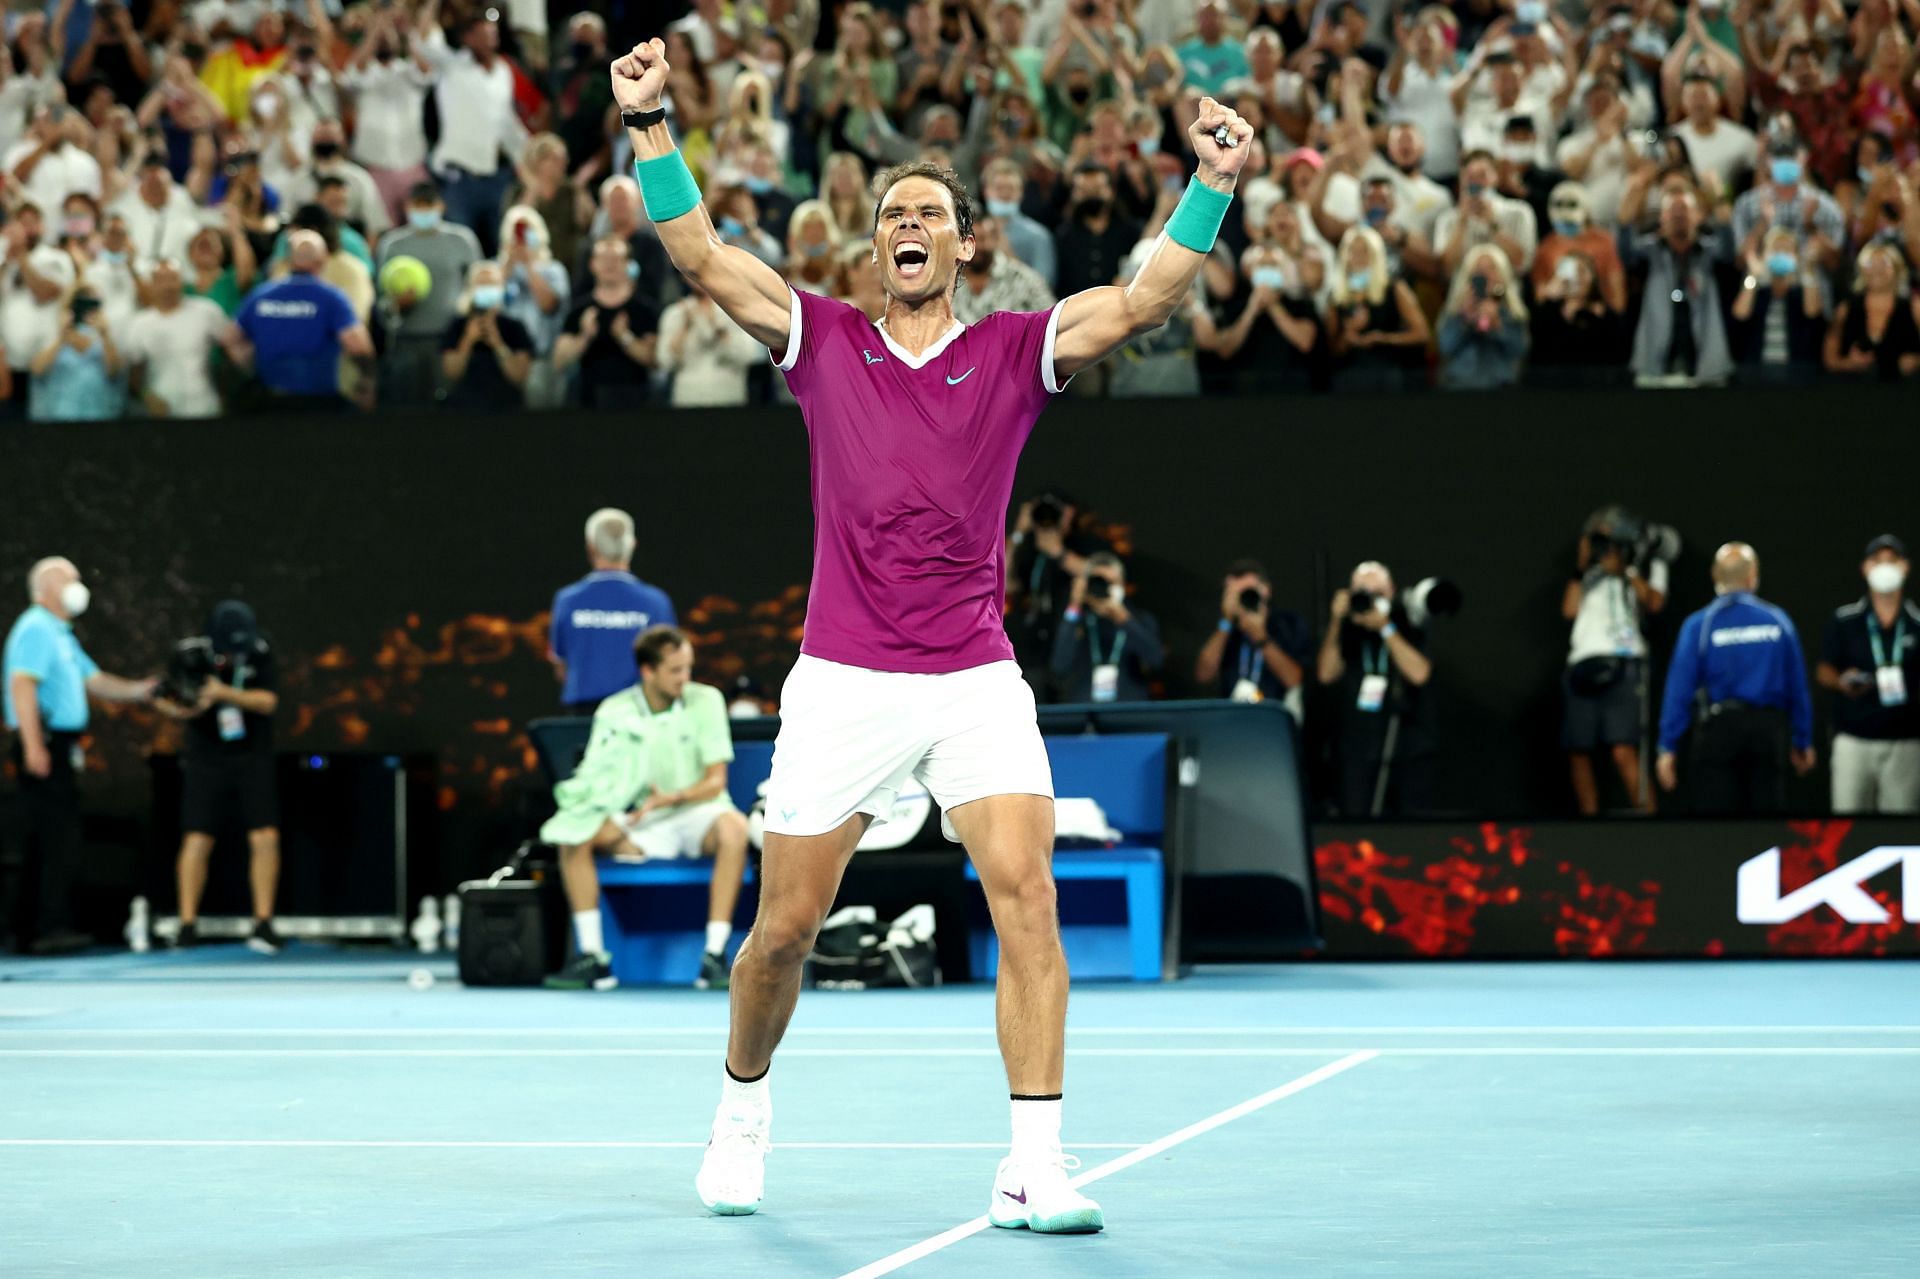 Rafael Nadal has won the first two Slams in the same year for the first time.